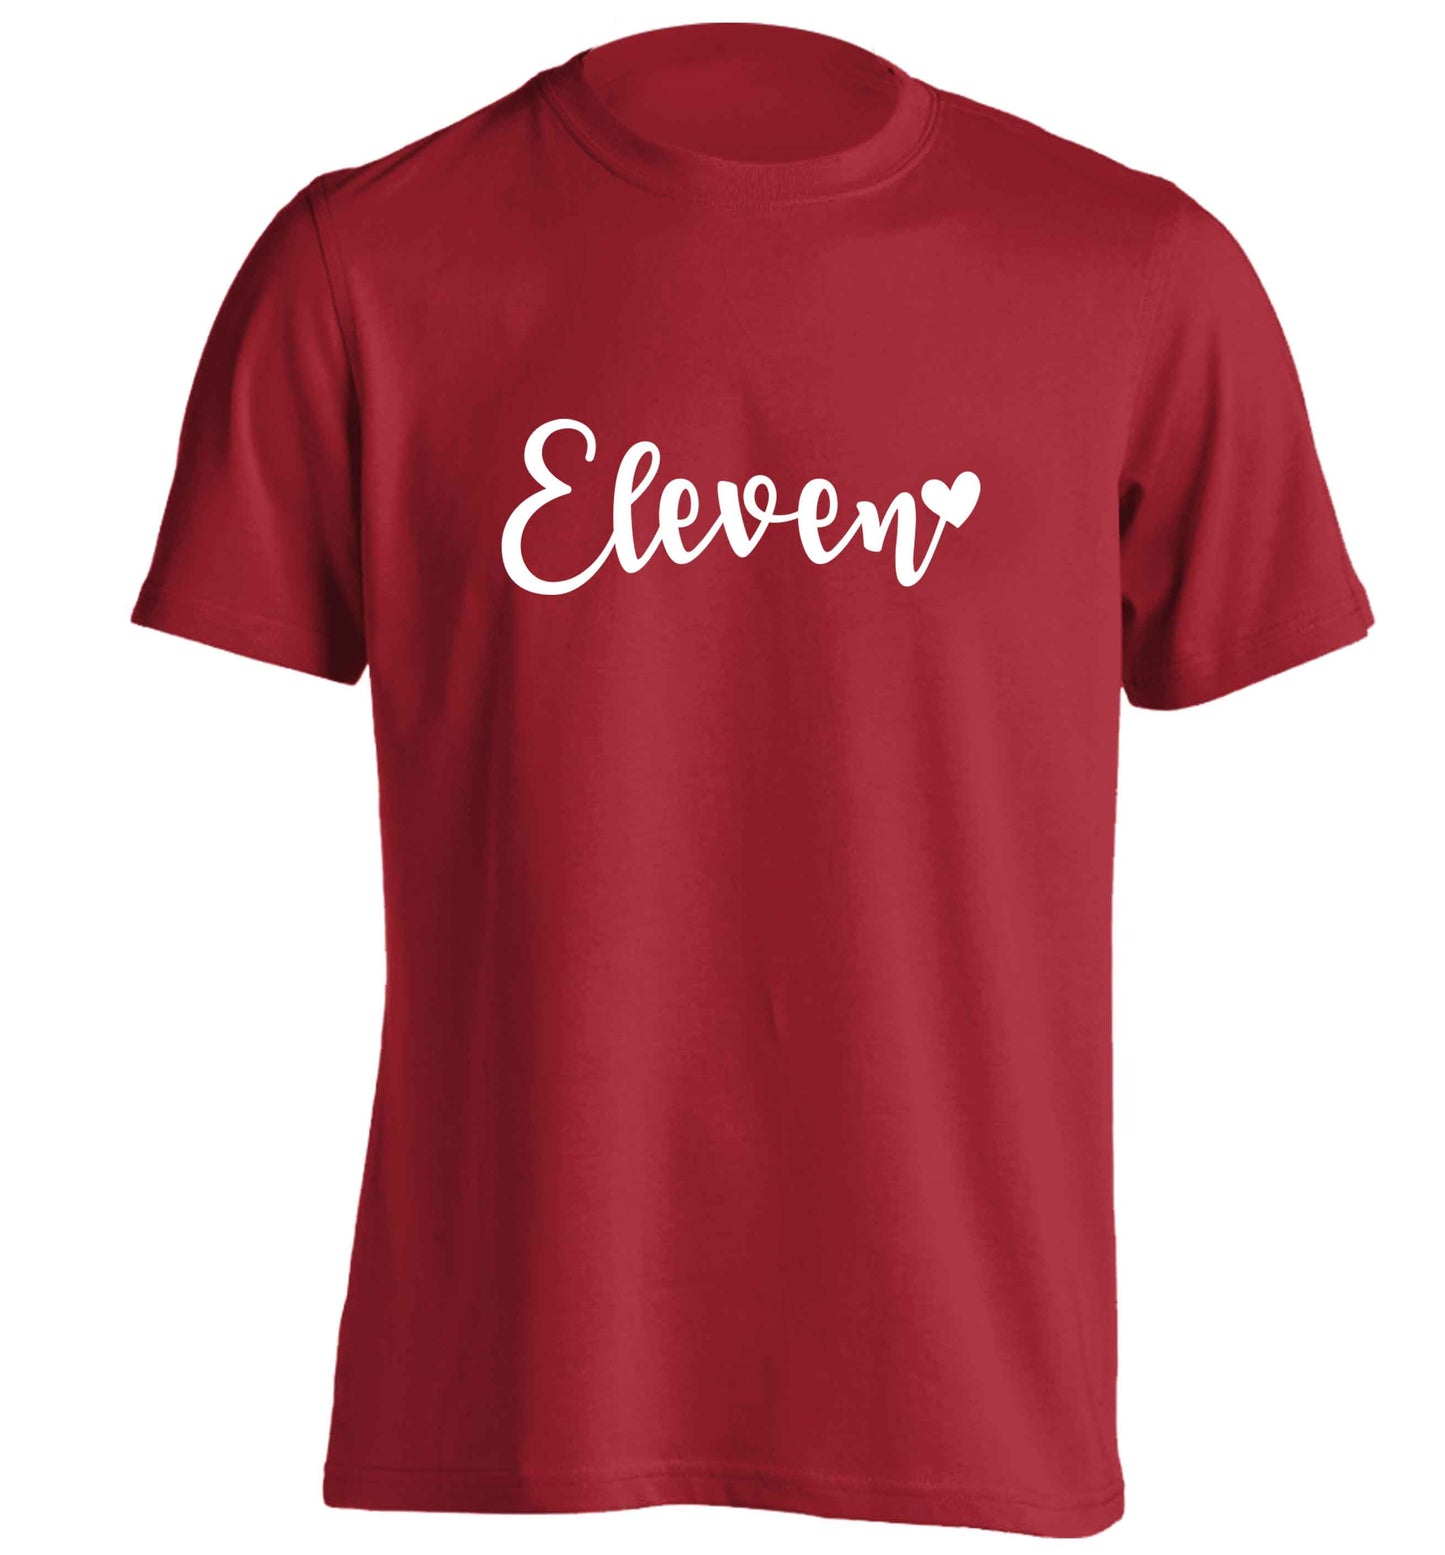 Eleven and heart! adults unisex red Tshirt 2XL